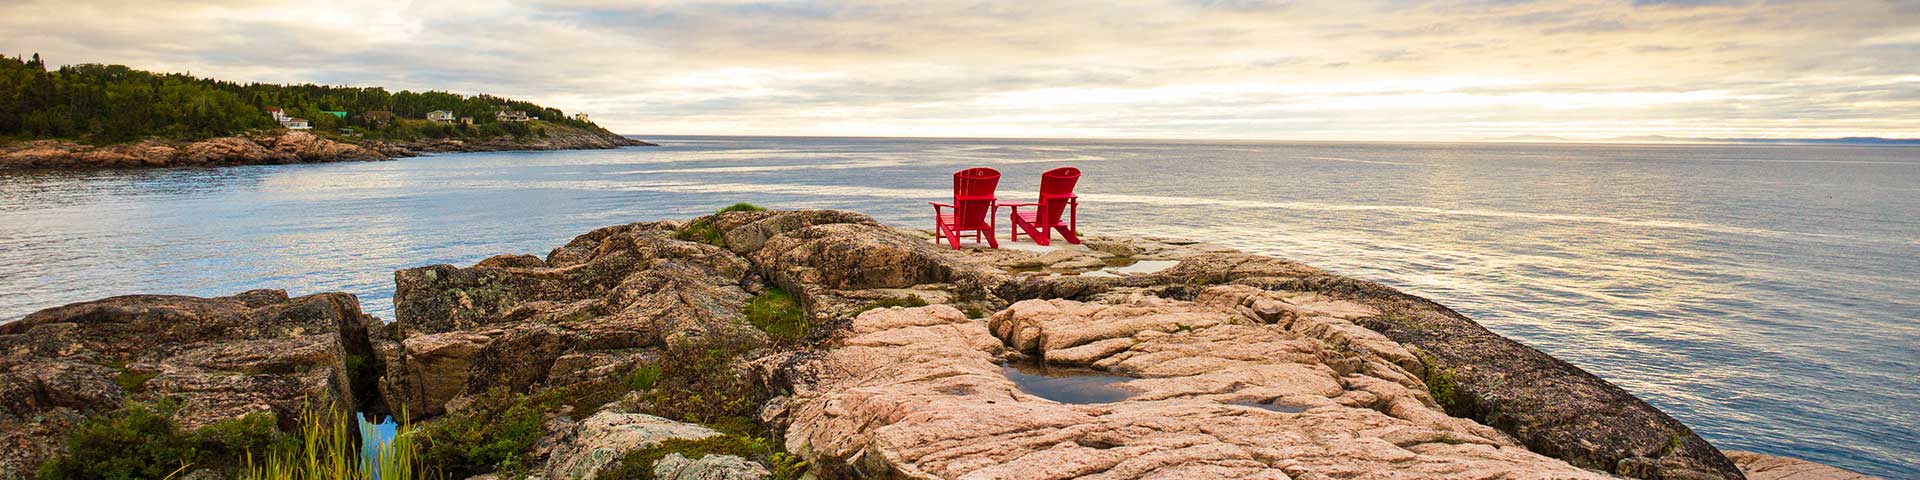 Two red chairs on an outcrop of rocks facing the ocean at Saguenay-St-Lawrence Marine Park, Quebec